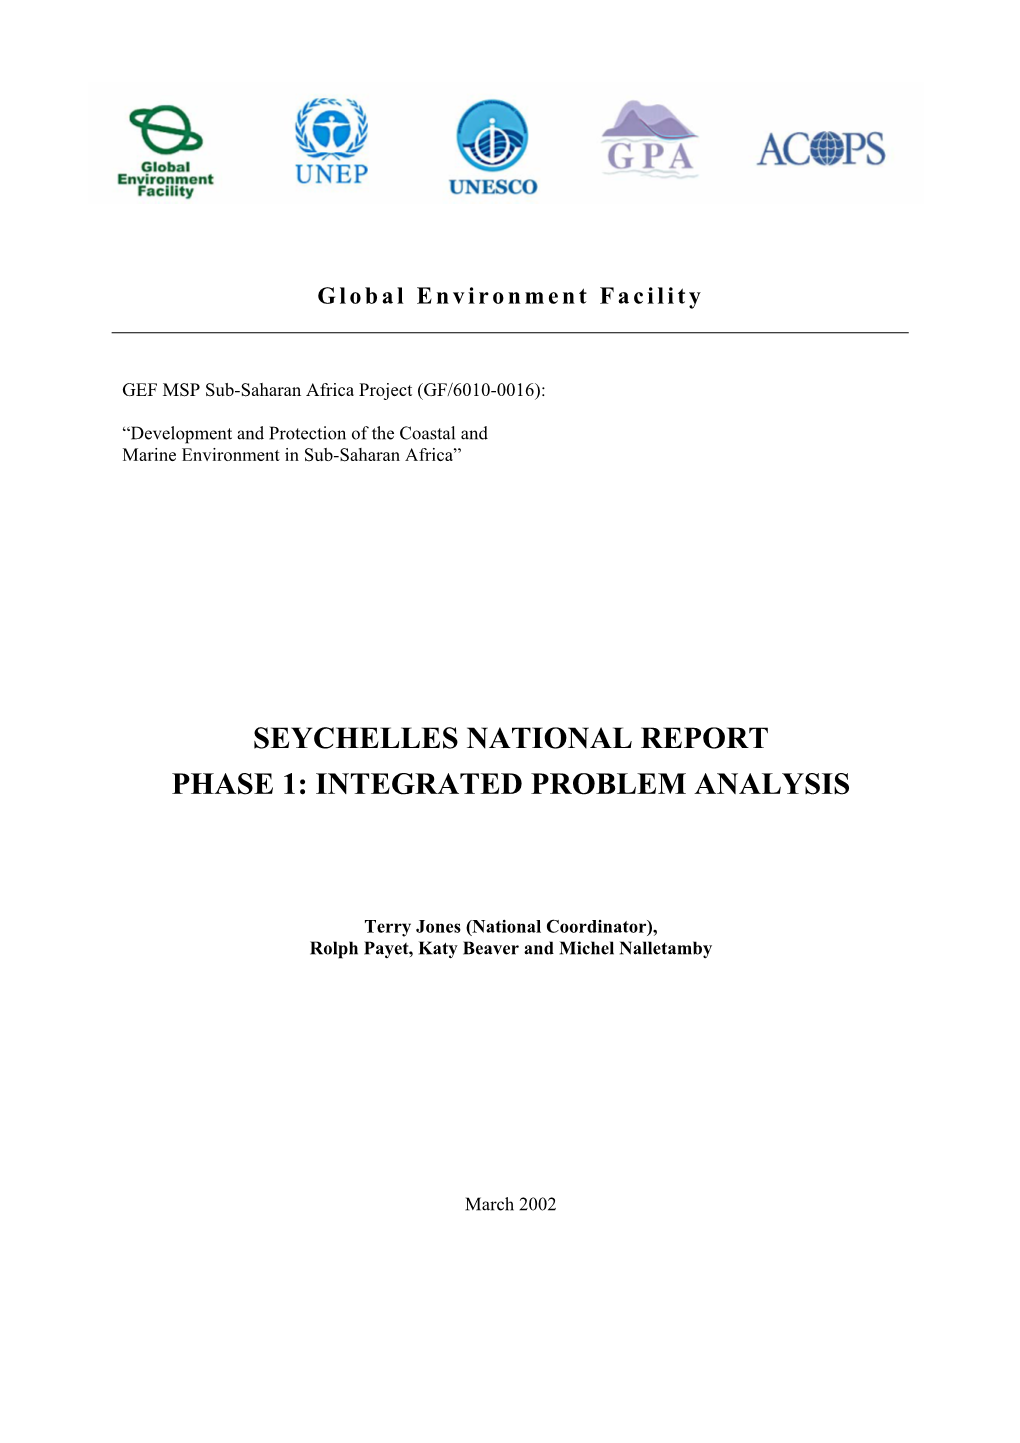 Seychelles National Report Phase 1: Integrated Problem Analysis